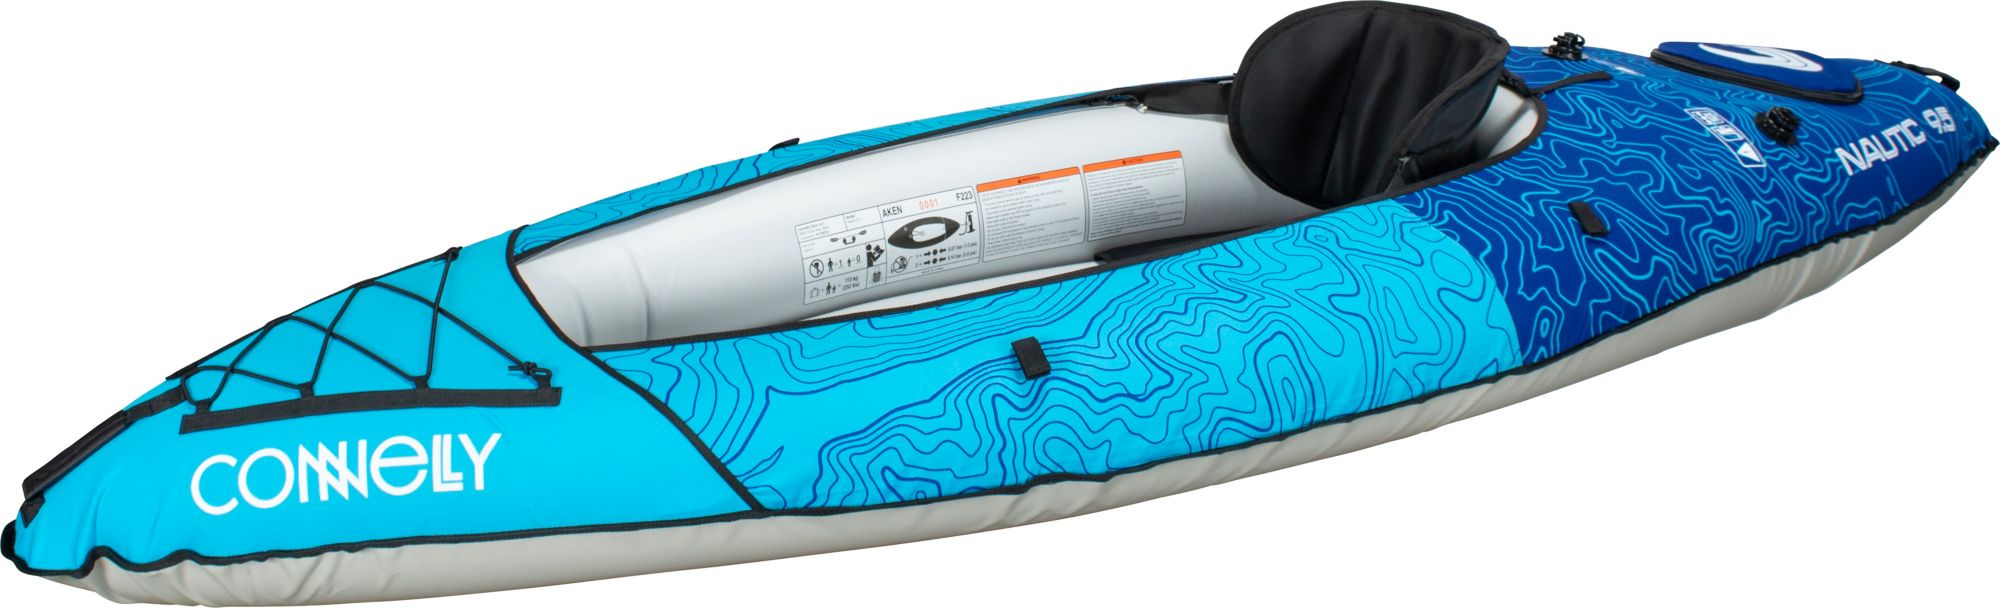 Dick's Sporting Goods Connelly Nautic 9.5 Solo Rider Inflatable